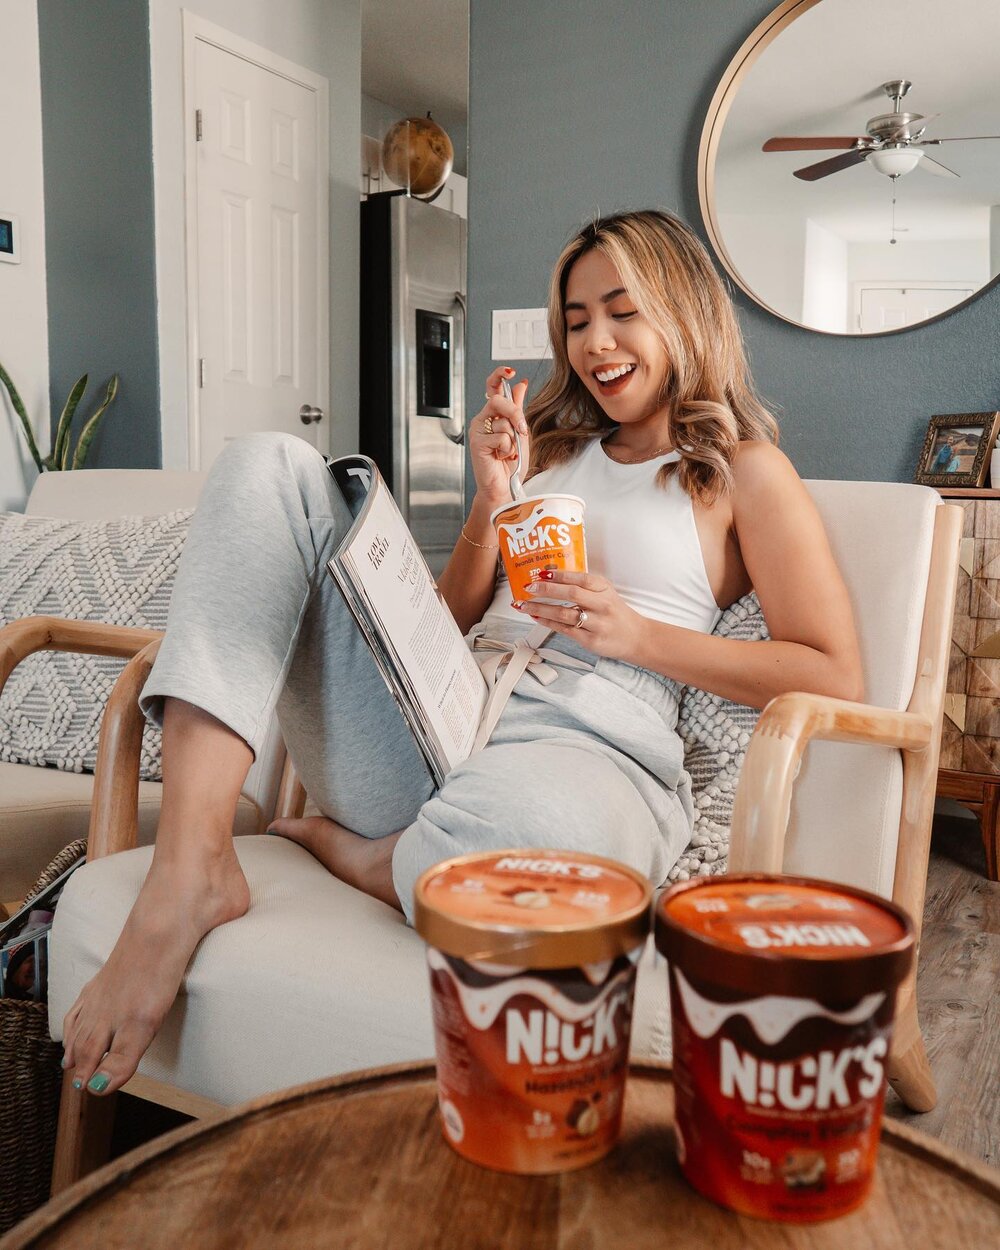 🍨😋✈️ Planning my next getaway while enjoying my not-so-guilty pleasure. #ad I never mind snacking on @nicksicecreams. It's creamy, low-calorie, and even taste like a candy bar. Delicious is an understatement. 👌

Check out my stories to learn more 